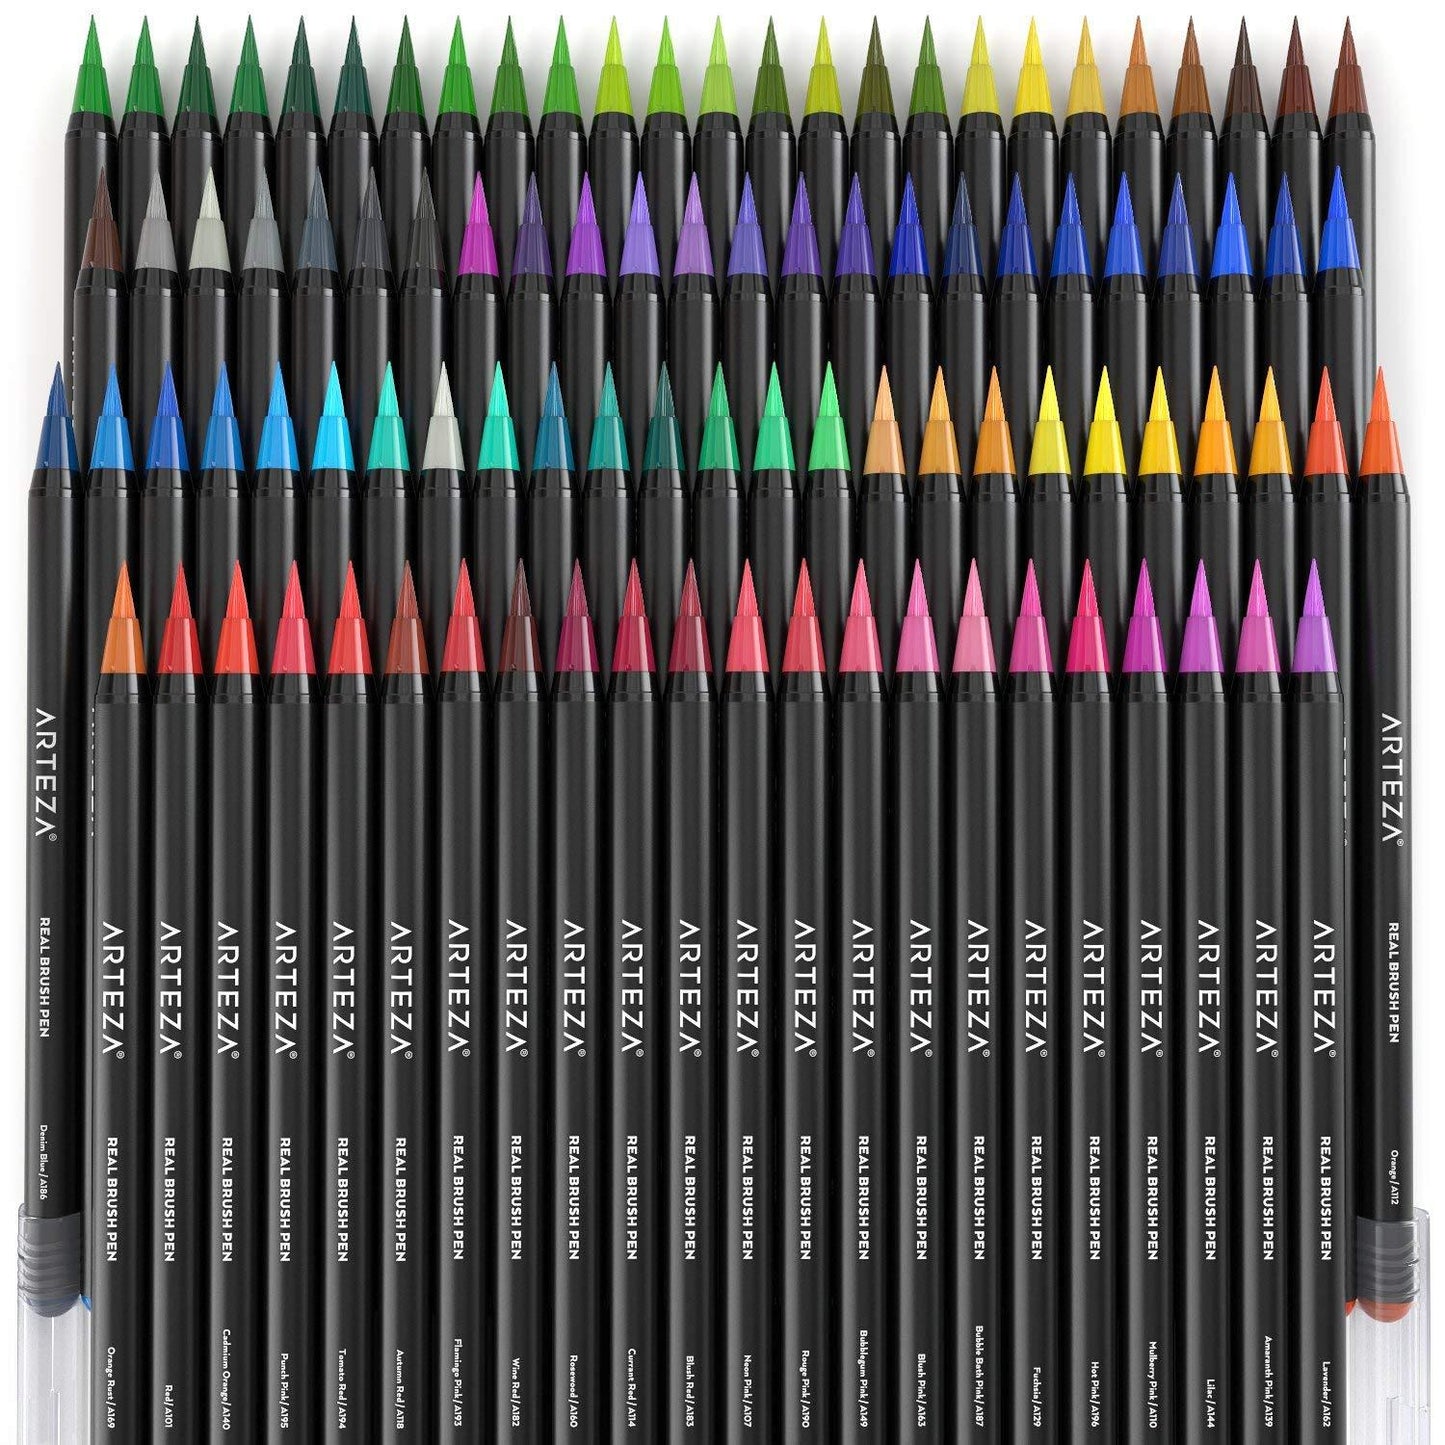 https://arteza.com/cdn/shop/products/real-brush-pens-96-with-organizer-case-with-108-slots-water-brush-pen_r260zPCM.jpg?v=1668631576&width=1445